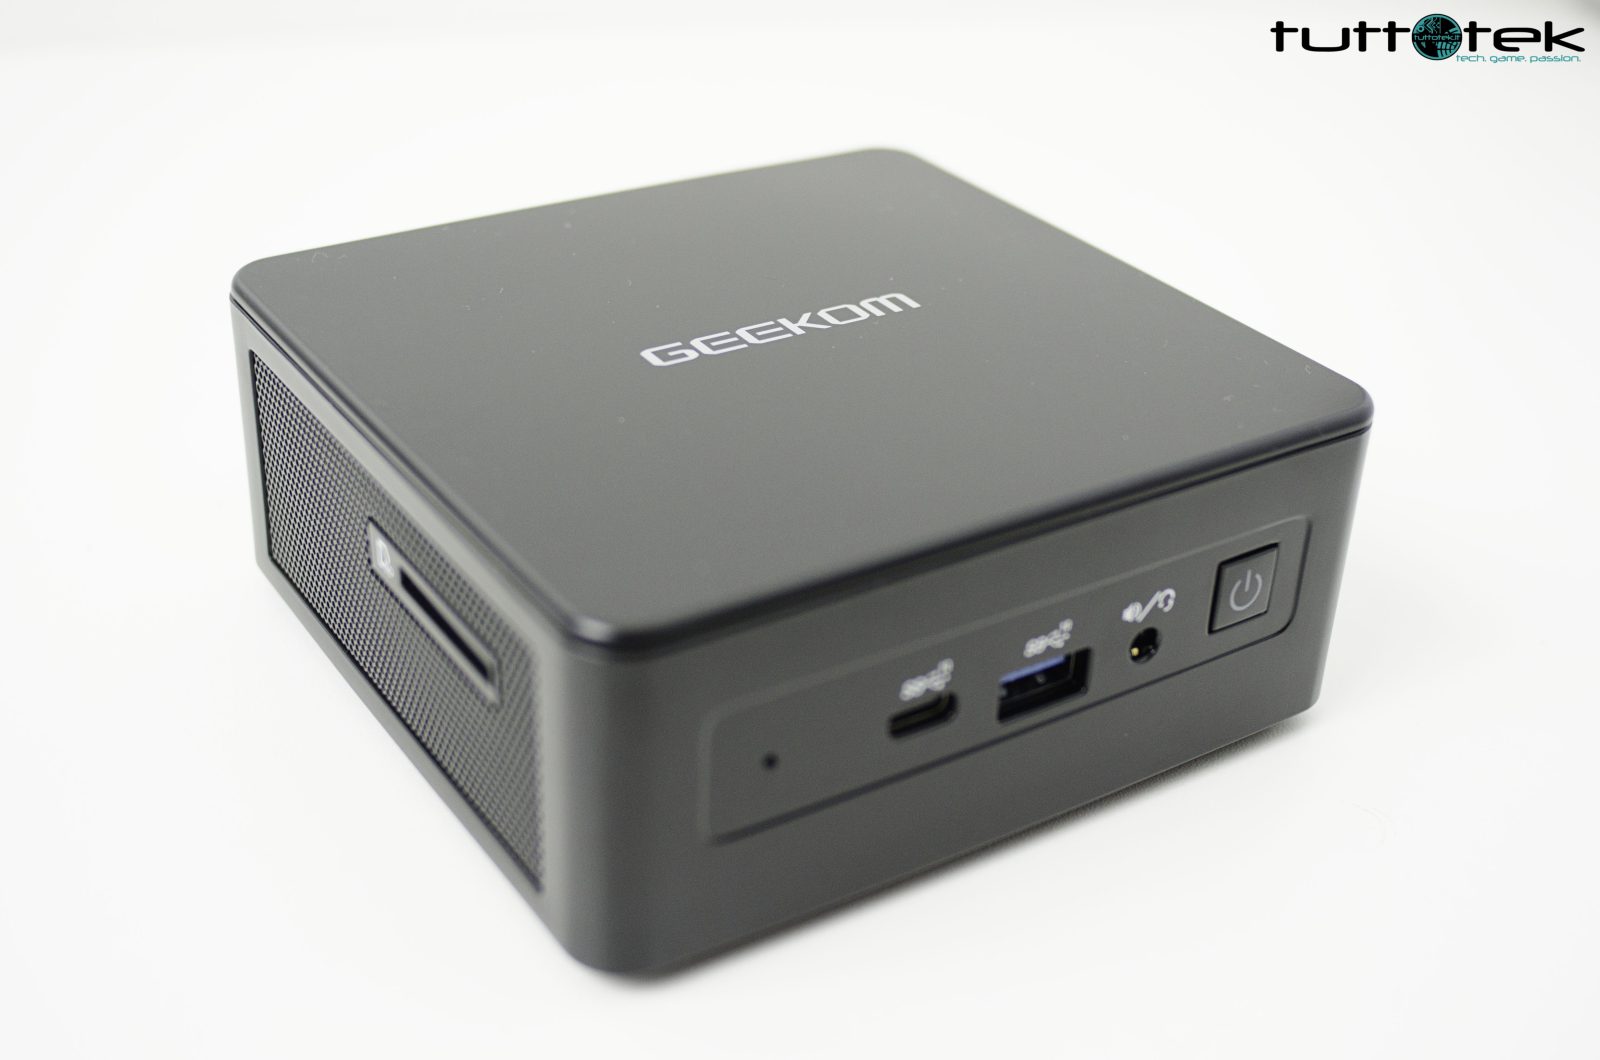 GEEKOM Mini IT8 review: a simple and effective mini PC